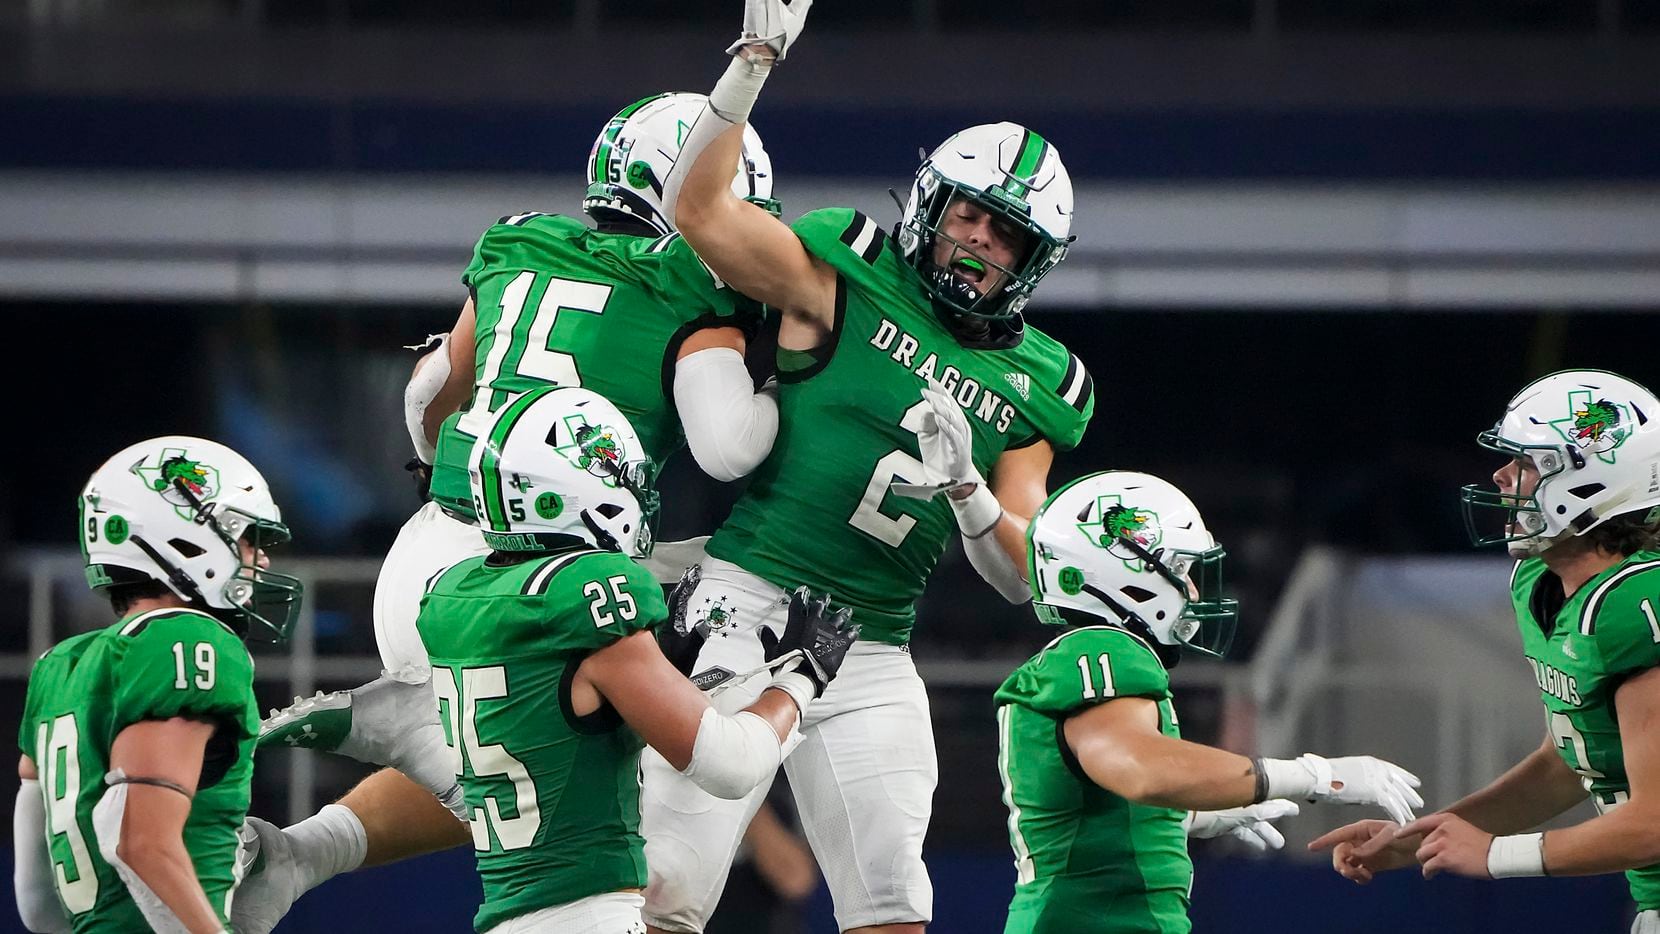 Southlake Carroll linebacker Allan Kleiman (15) celebrates with running back Owen Allen (2) after intercepting a pass during the second half of a high school football game against Highland Park at AT&T Stadium on Thursday, Aug. 26, 2021, in Arlington. (Smiley N. Pool/The Dallas Morning News)